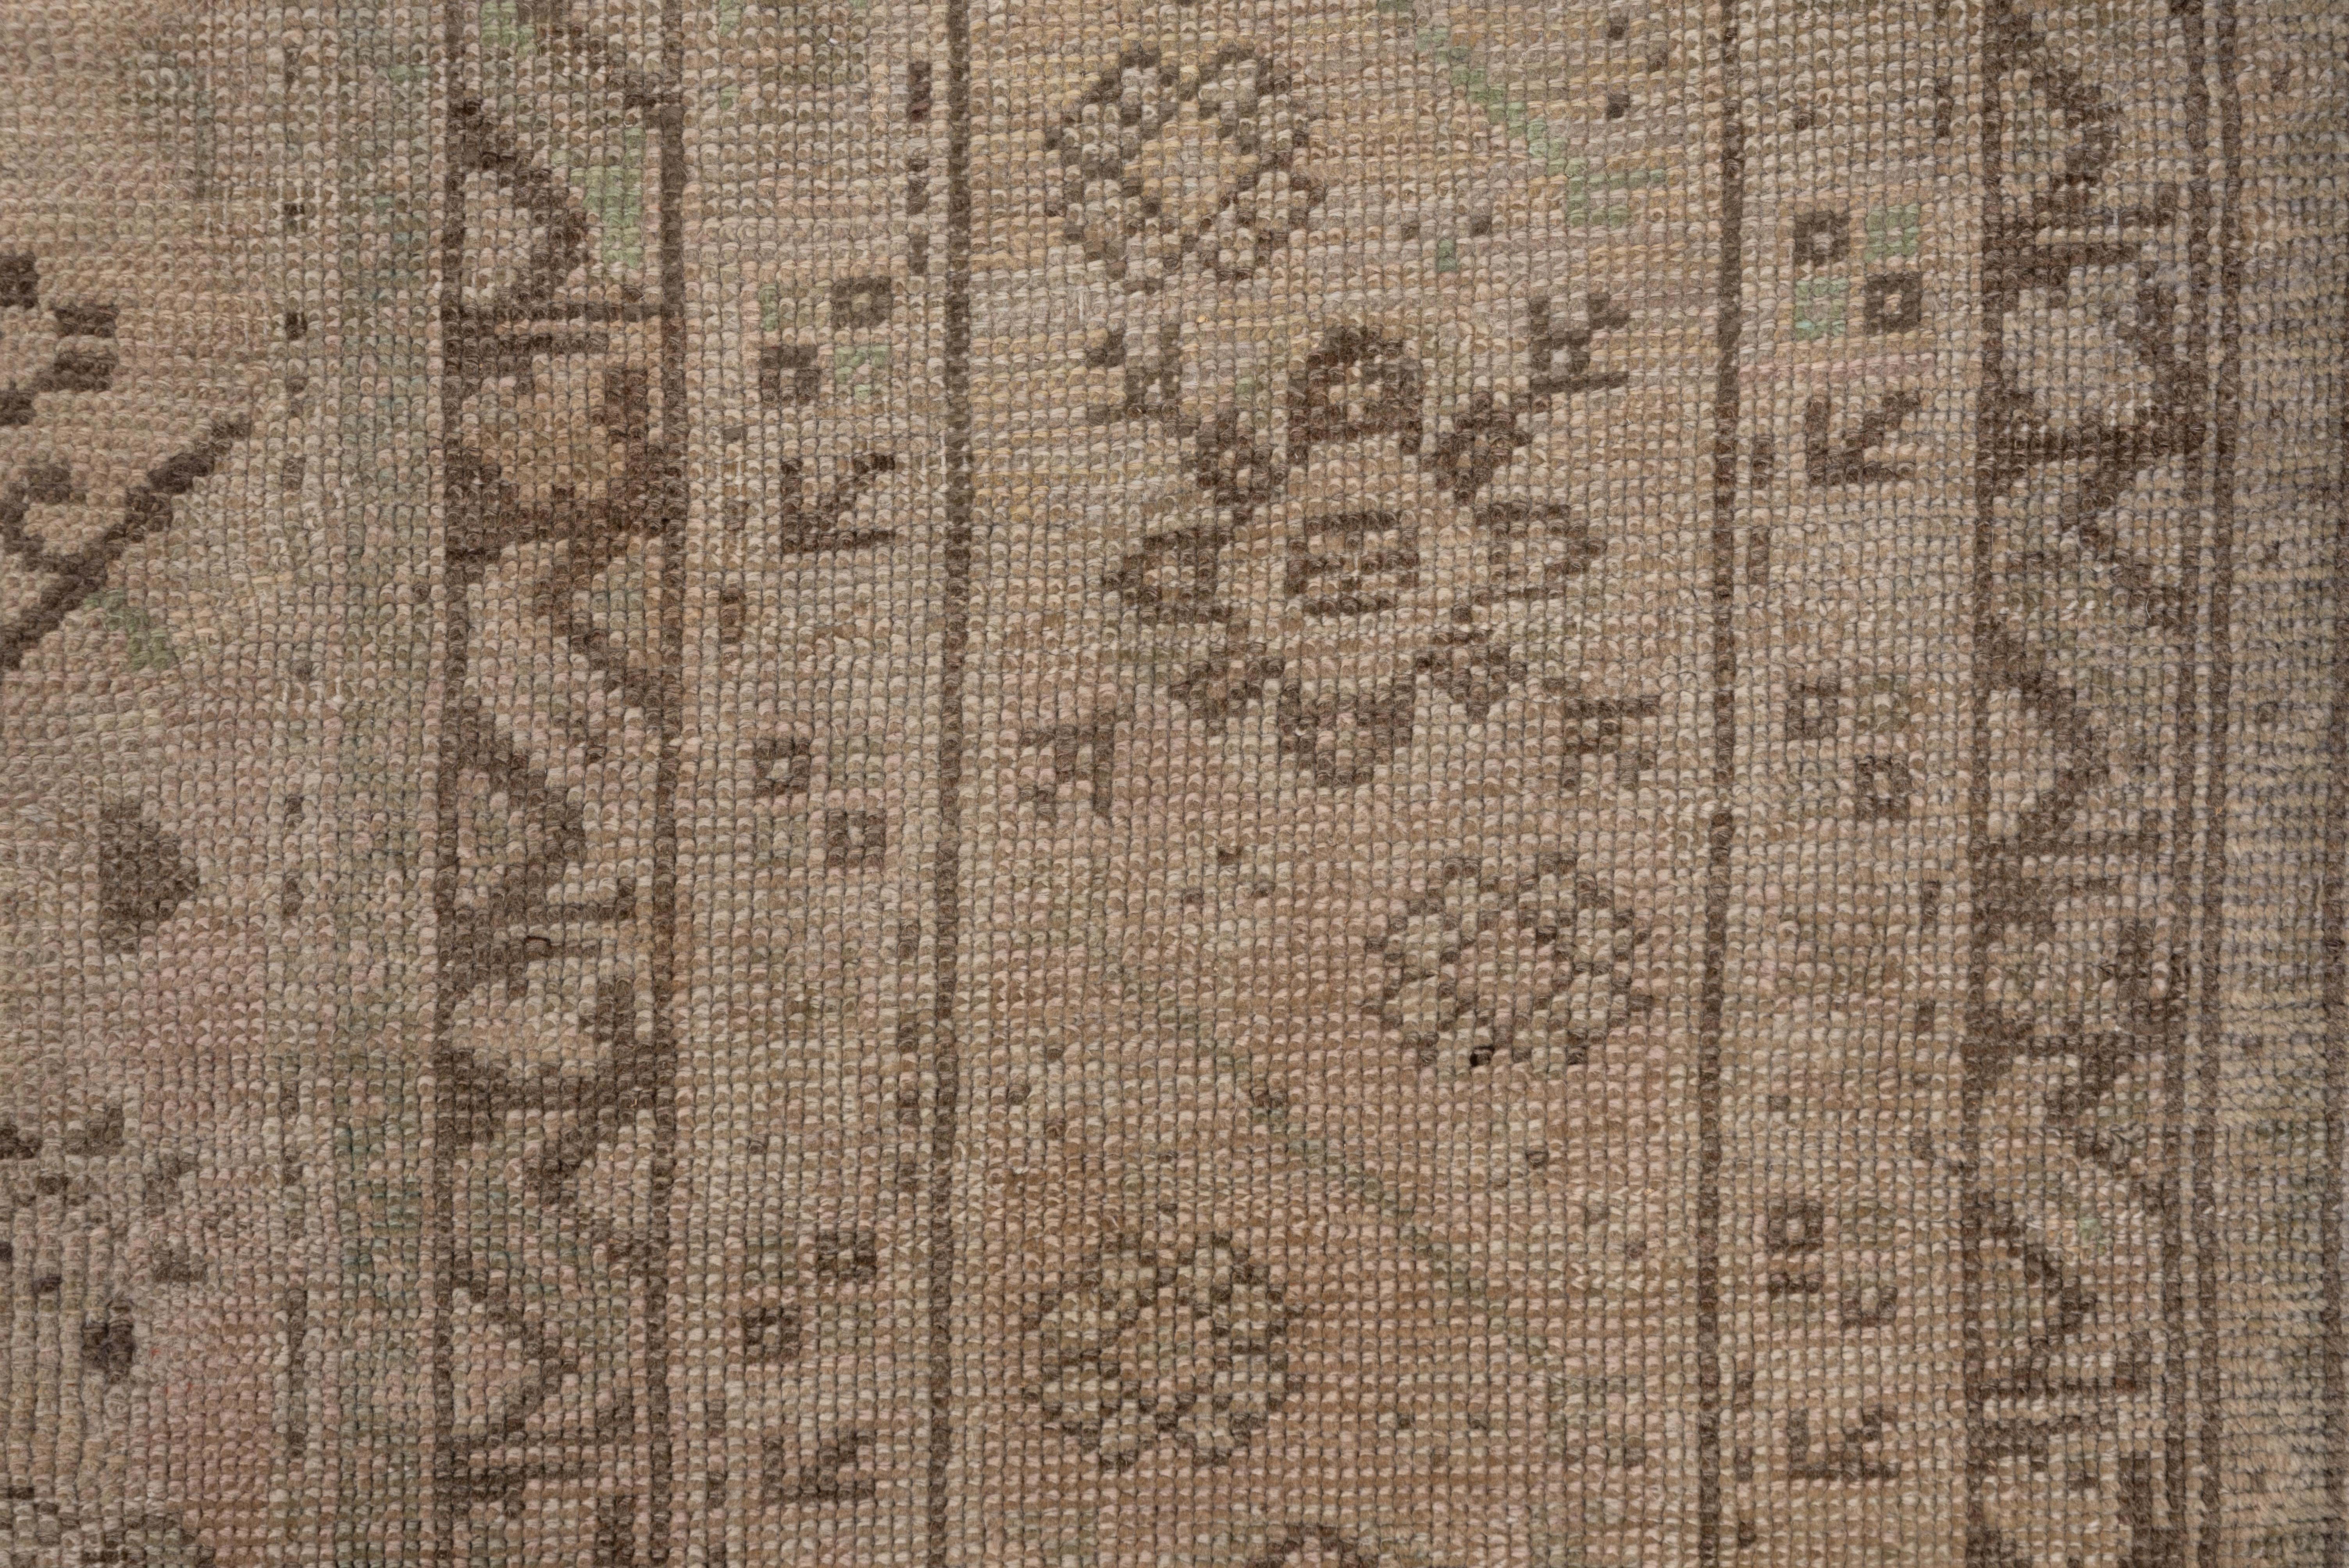 This extra-large, west anatolian coarsely woven carpet shows a neutral field & green accents with a three column design of giant ragged palmettes and a central run of Yaprak (